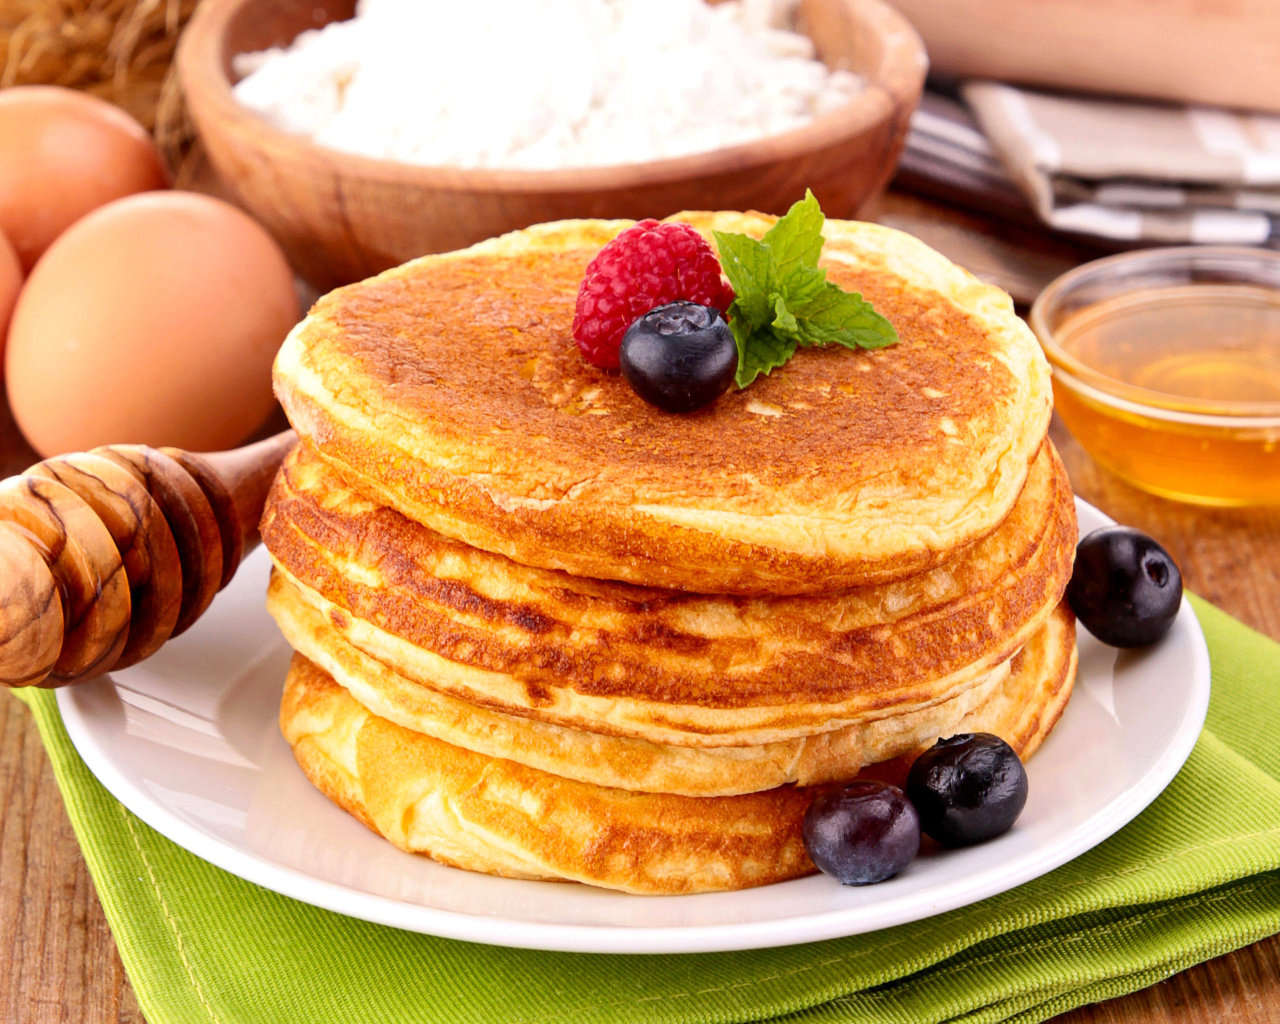 Pancakes with honey wallpaper 1280x1024